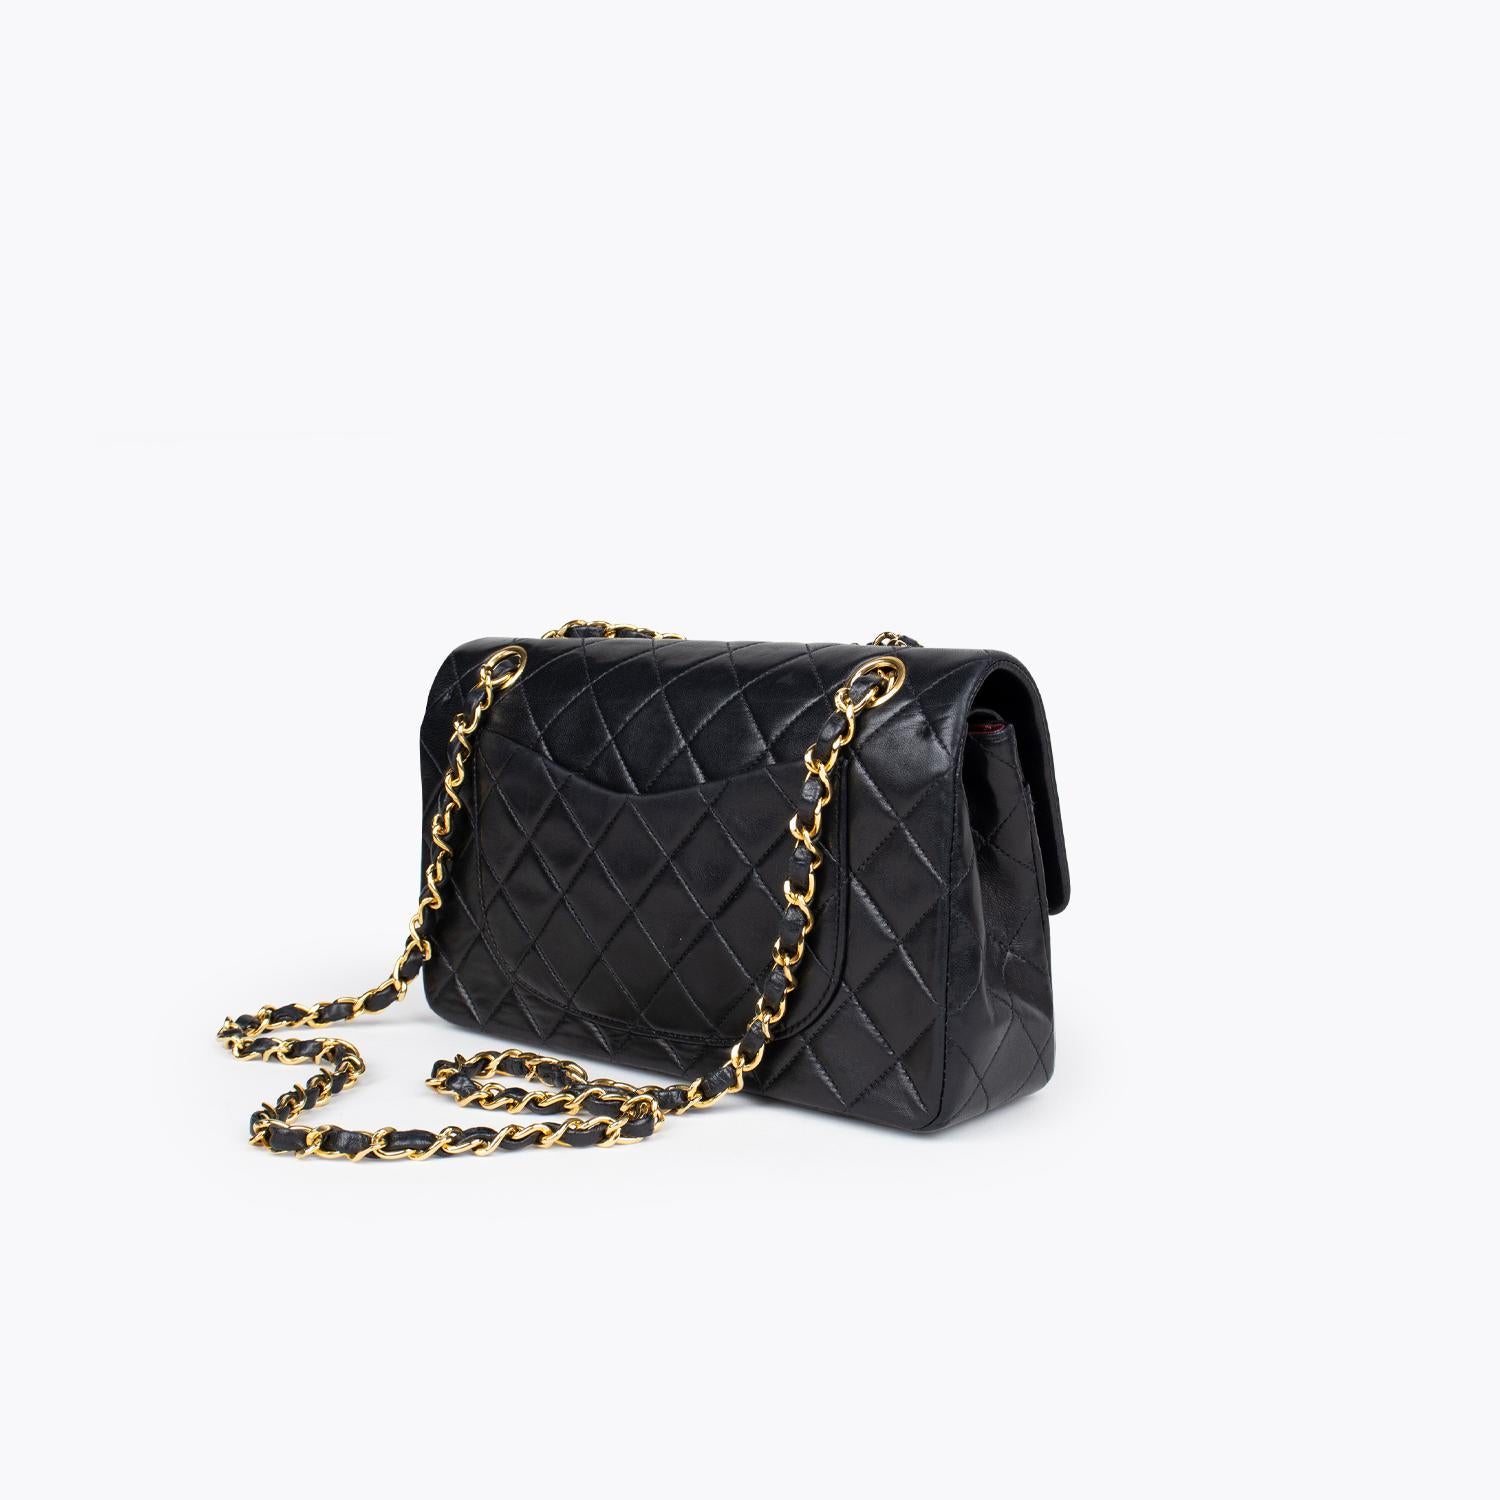 Chanel Small Classic Double Flap Bag In Good Condition For Sale In Sundbyberg, SE